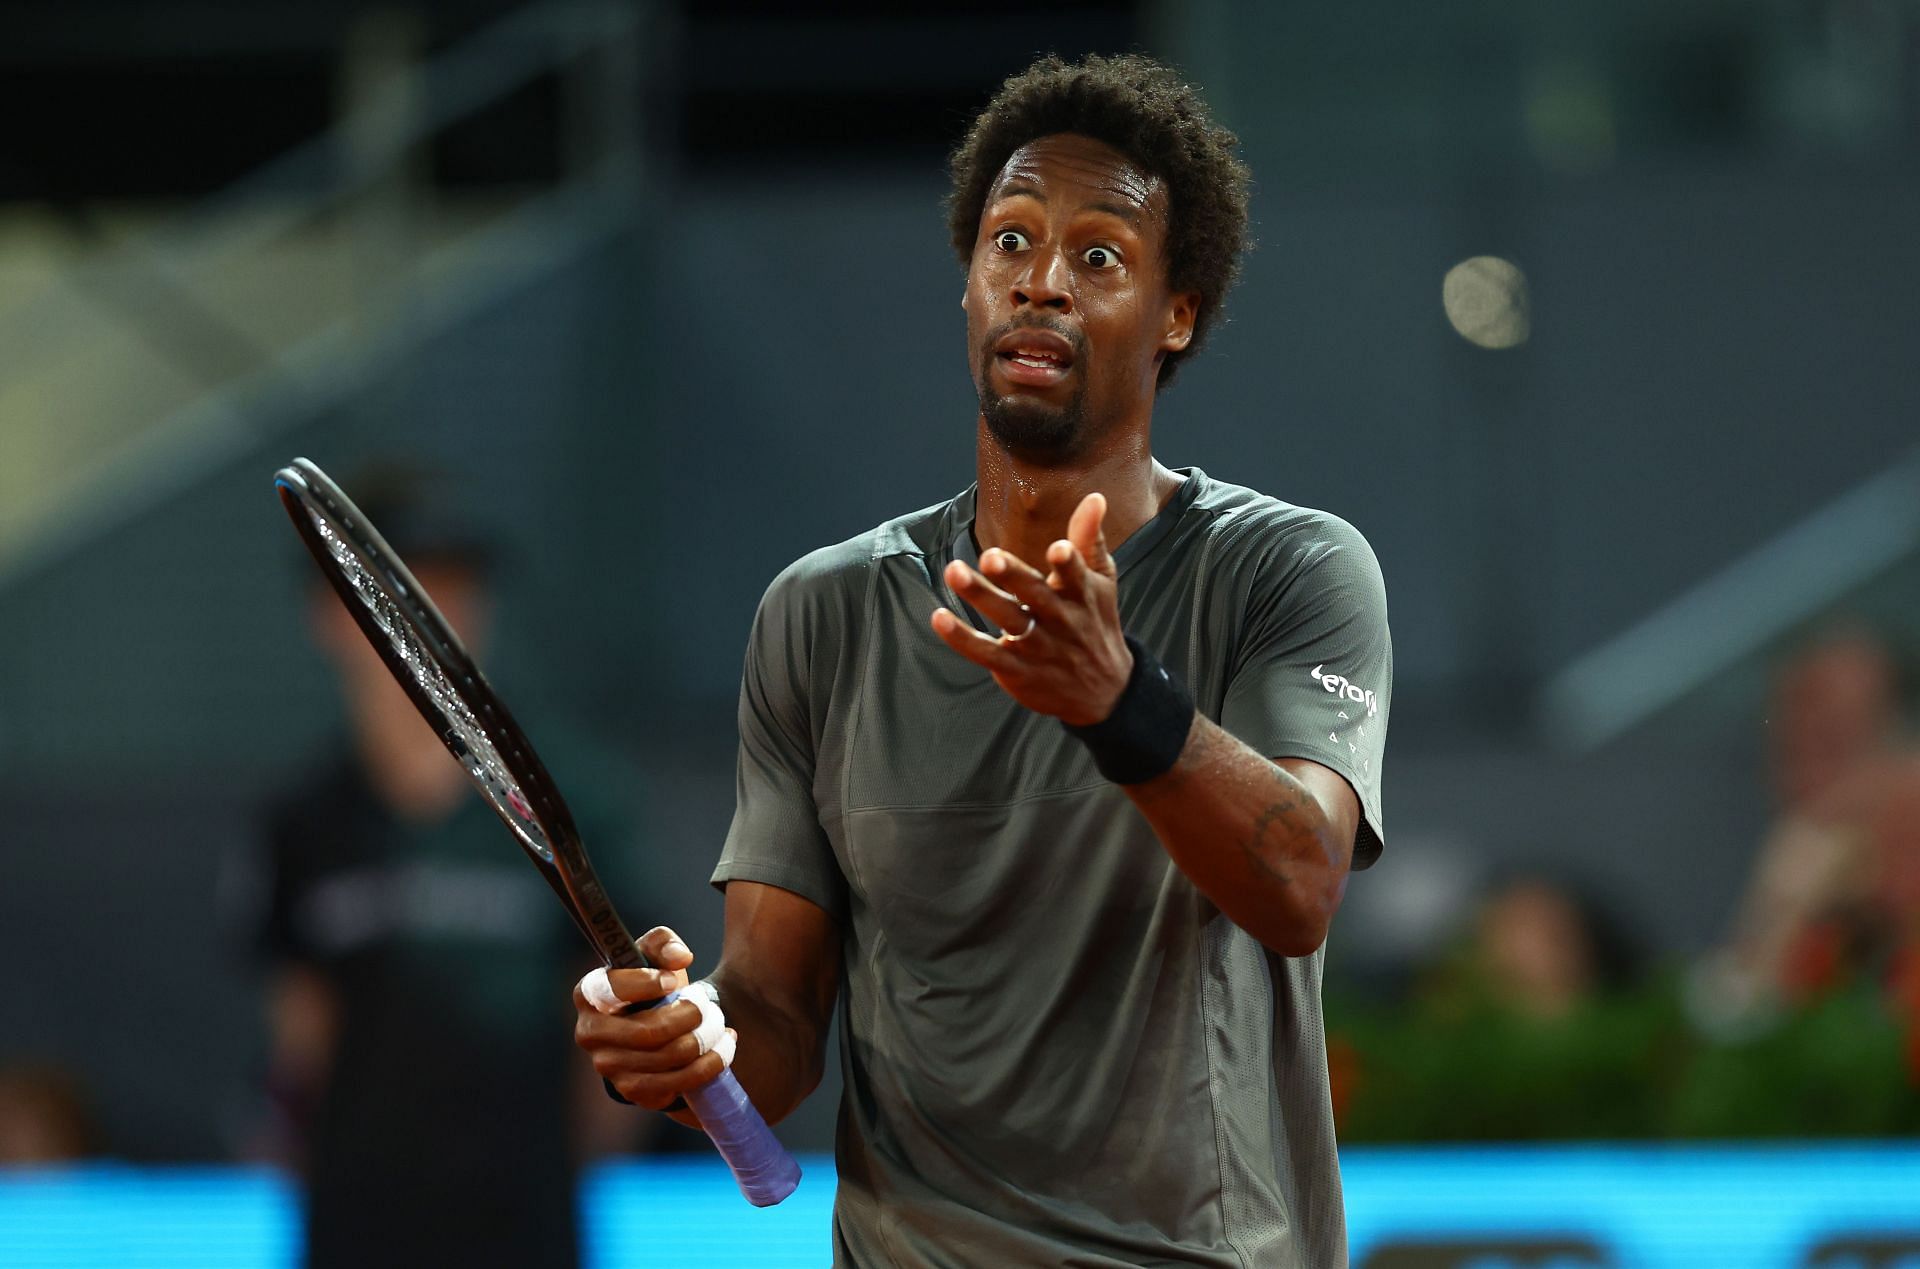 Gael Monfils has had an injury-plagued season, playing only 21 matches.